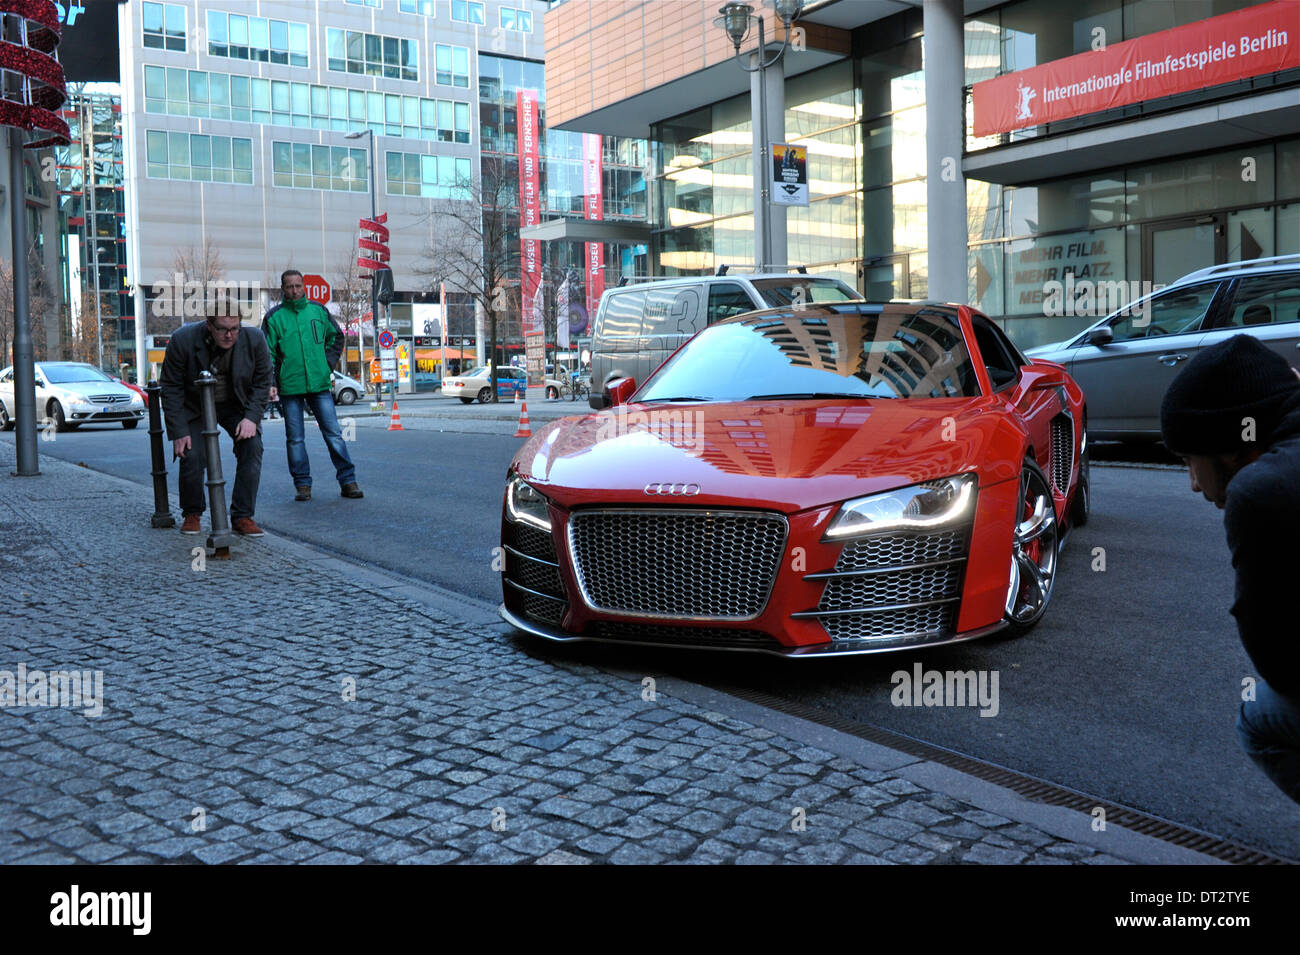 Berlin, Germany. 05th Feb, 2013. An Audi 'R8 Le Mans TDI V12' is pictured near the Berlinale Palace in Berlin, Germany, 05 February 2013. The custom-built car was used in the film 'I Robot' with Will Smith. Photo: Roland Popp/dpa/Alamy Live News Stock Photo